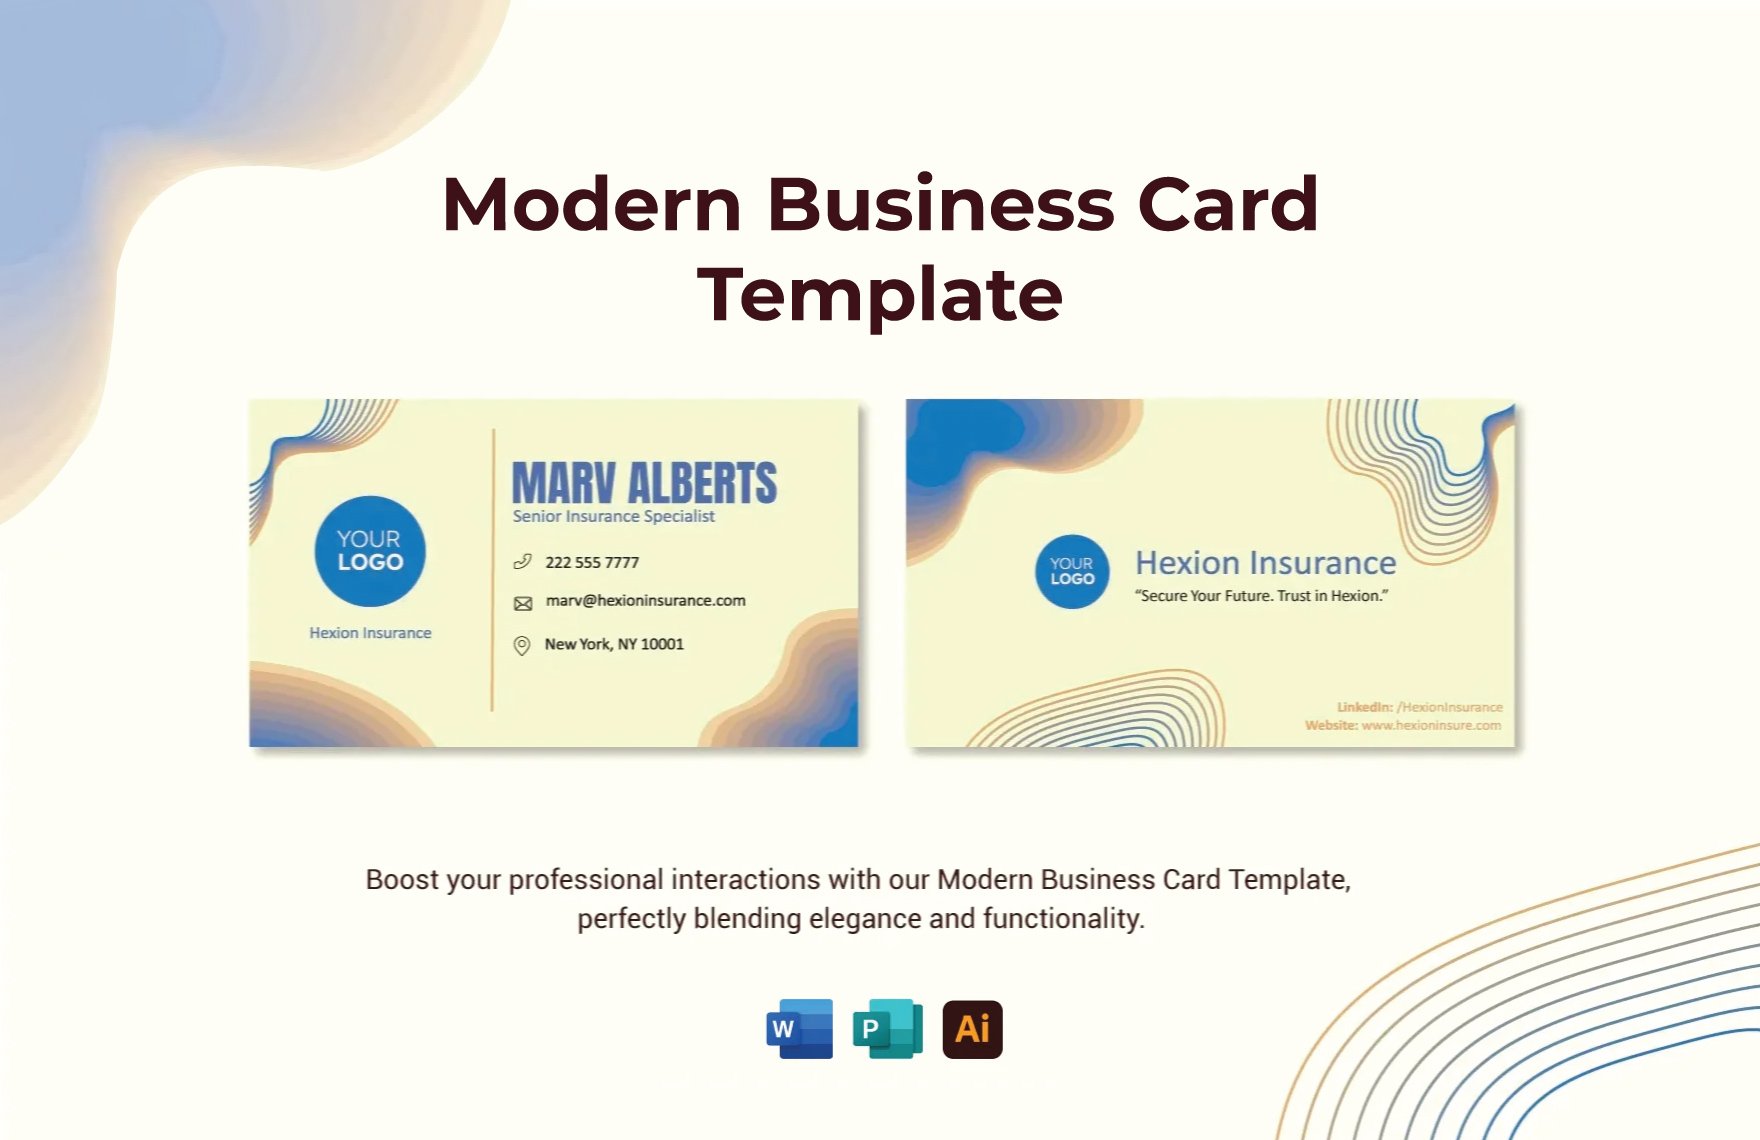 Free Modern Business Card Template in Word, Illustrator, Publisher